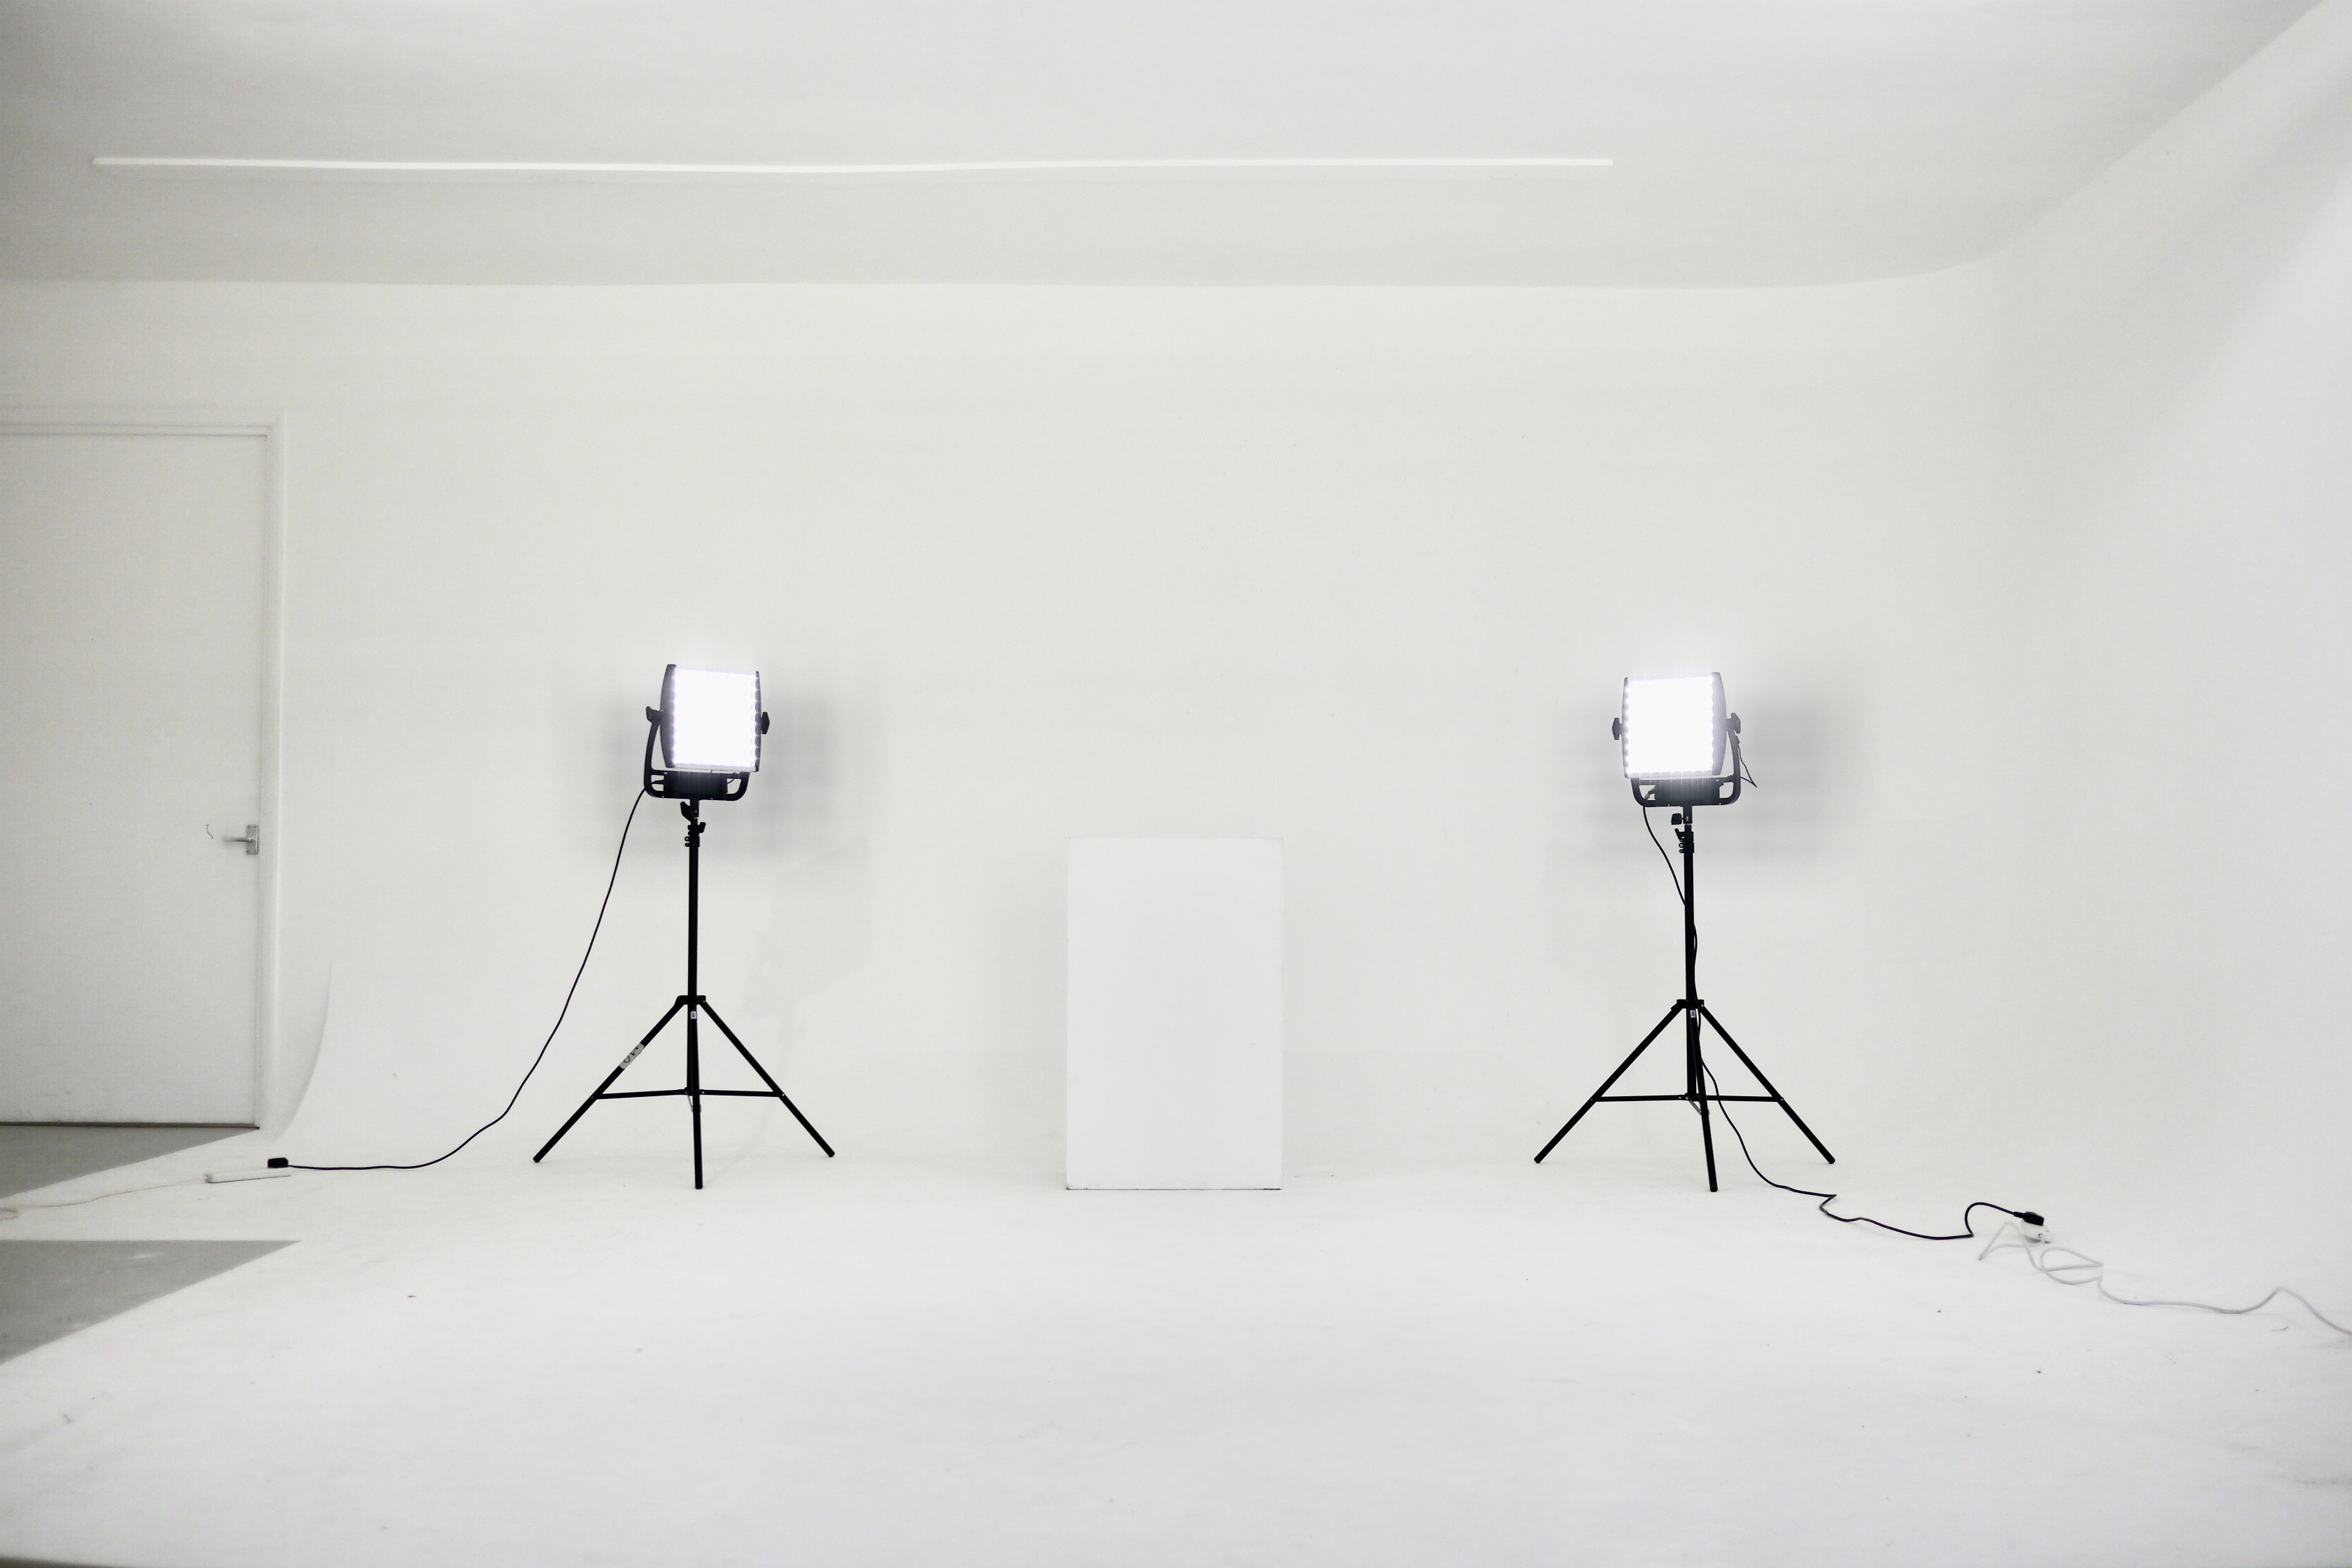 White infinity studio with two large black box lights, a black chair, and some wires and boxes.